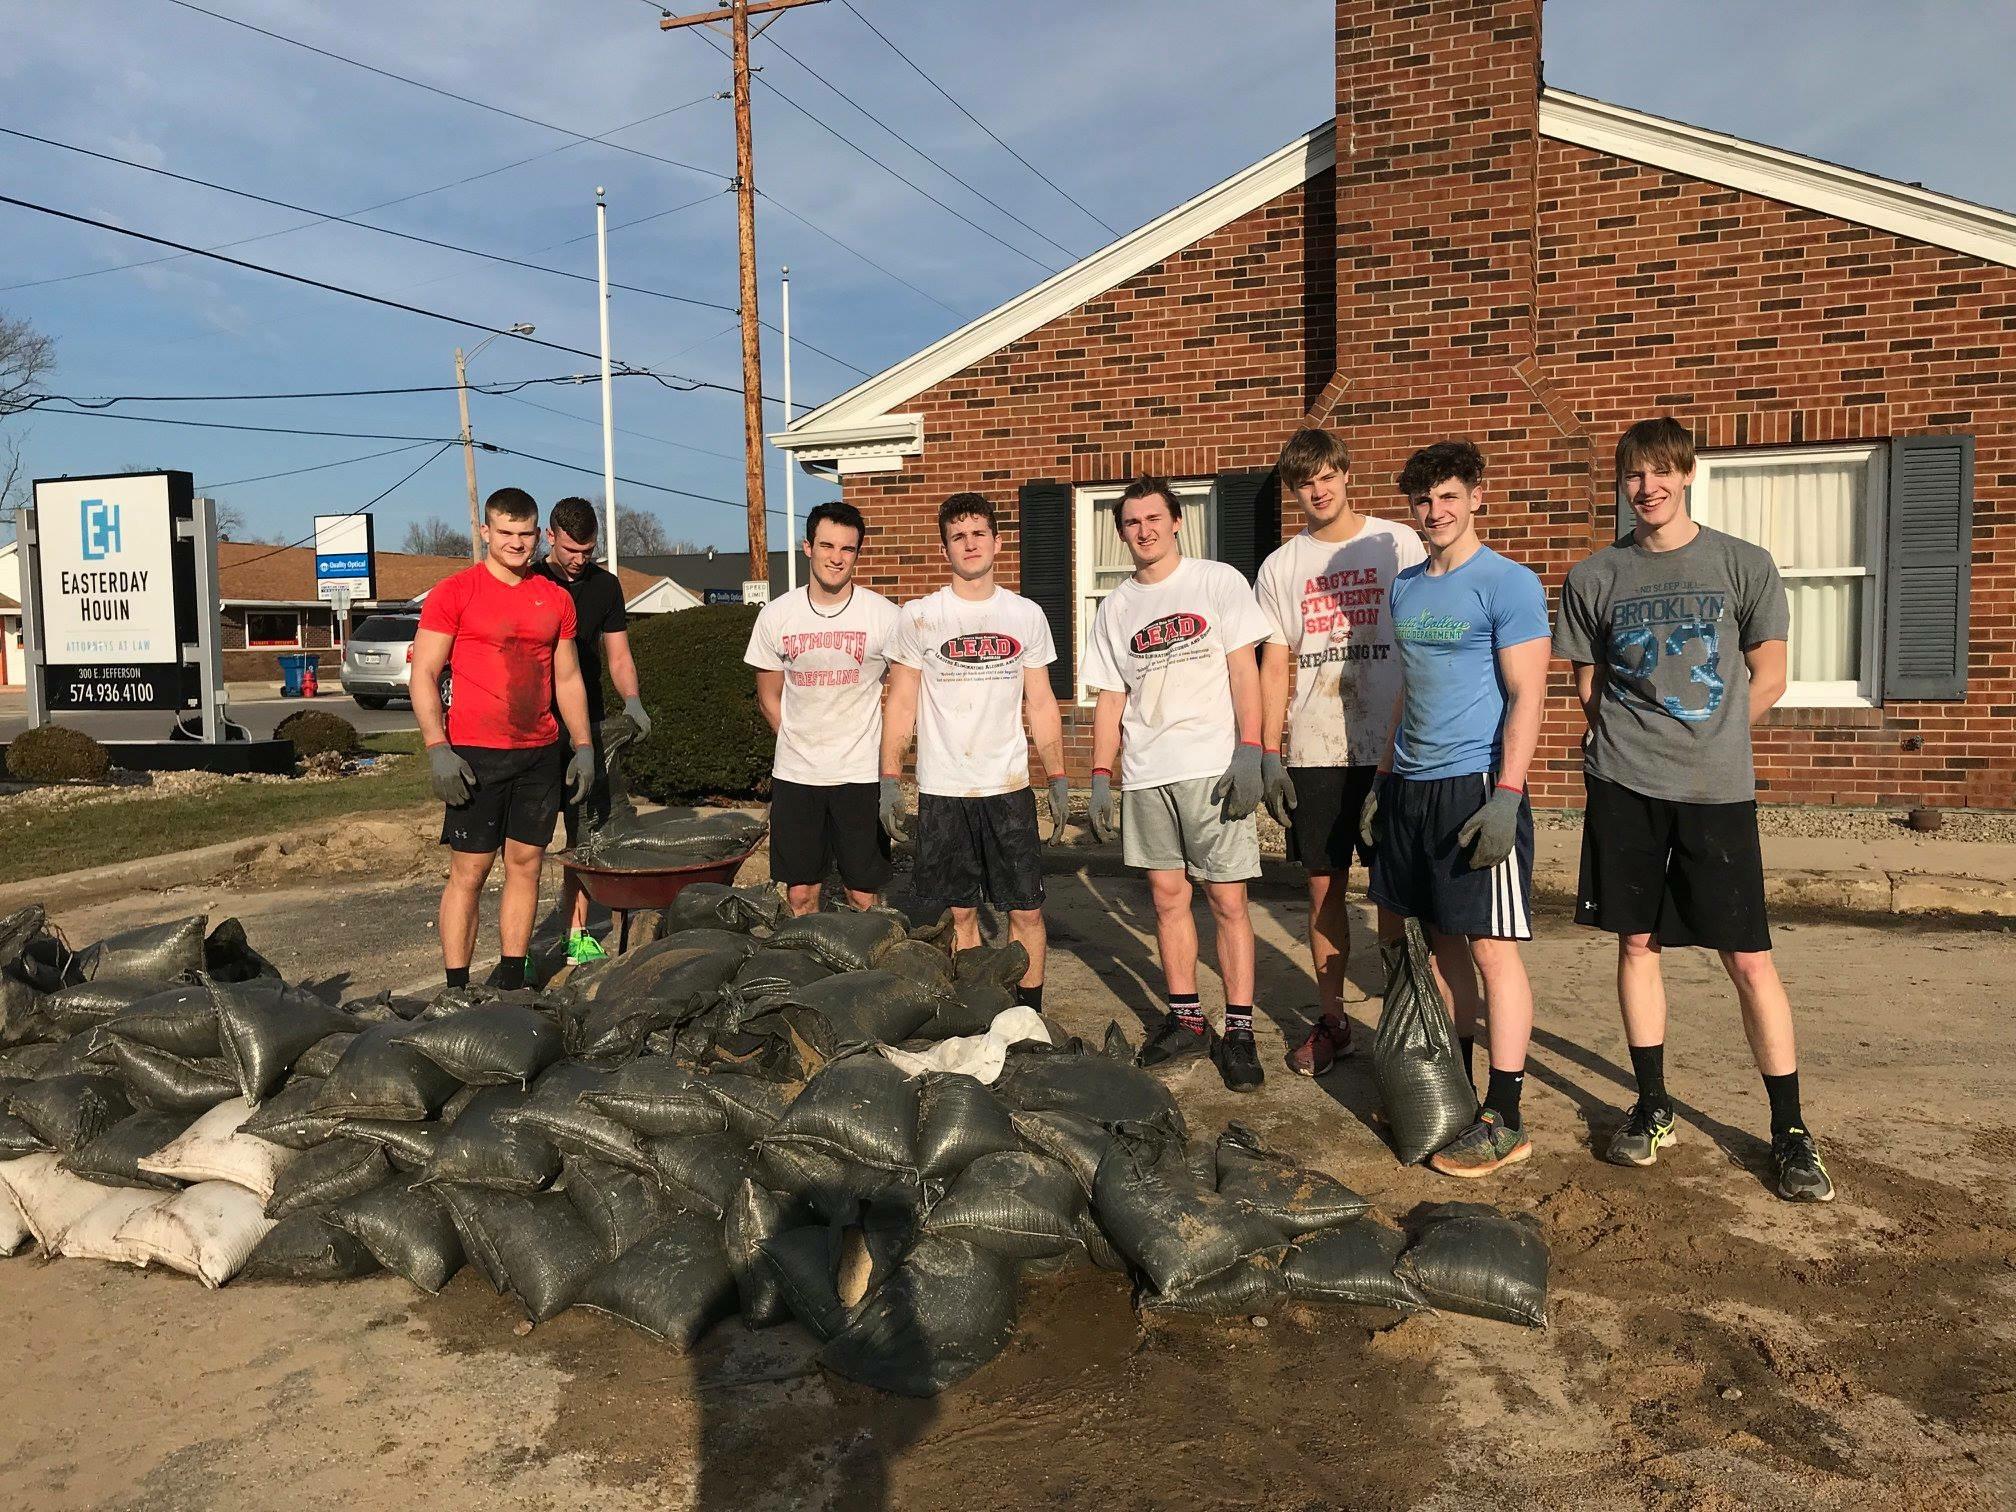 Some of the PHS track team helping move sandbags.